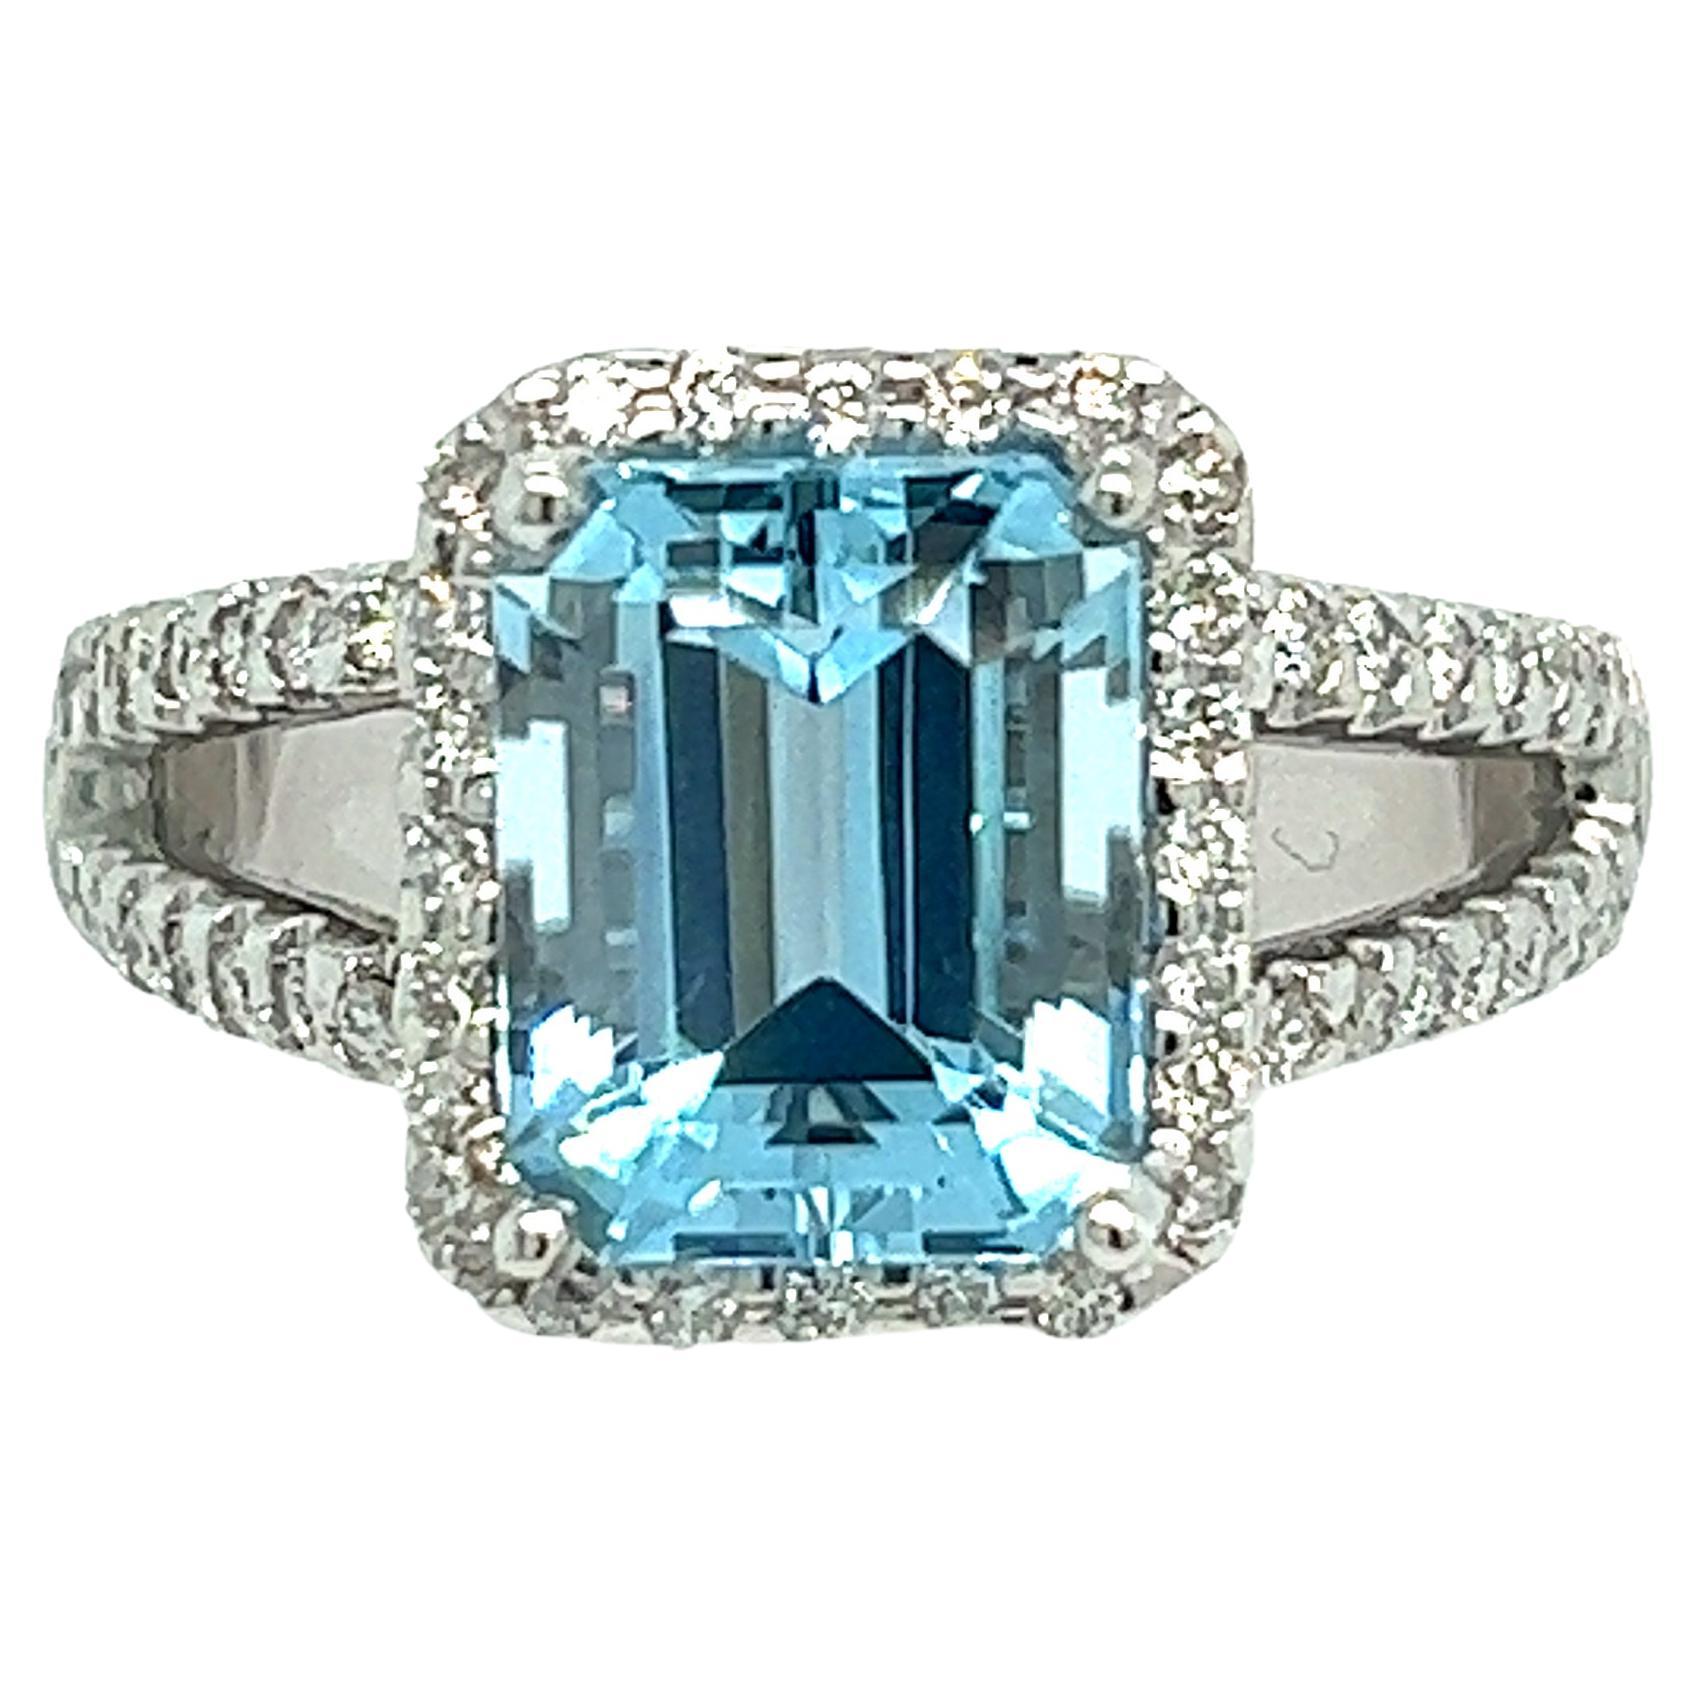 Natural Topaz Diamond Ring 6.5 14k W Gold 5.17 TCW Certified For Sale